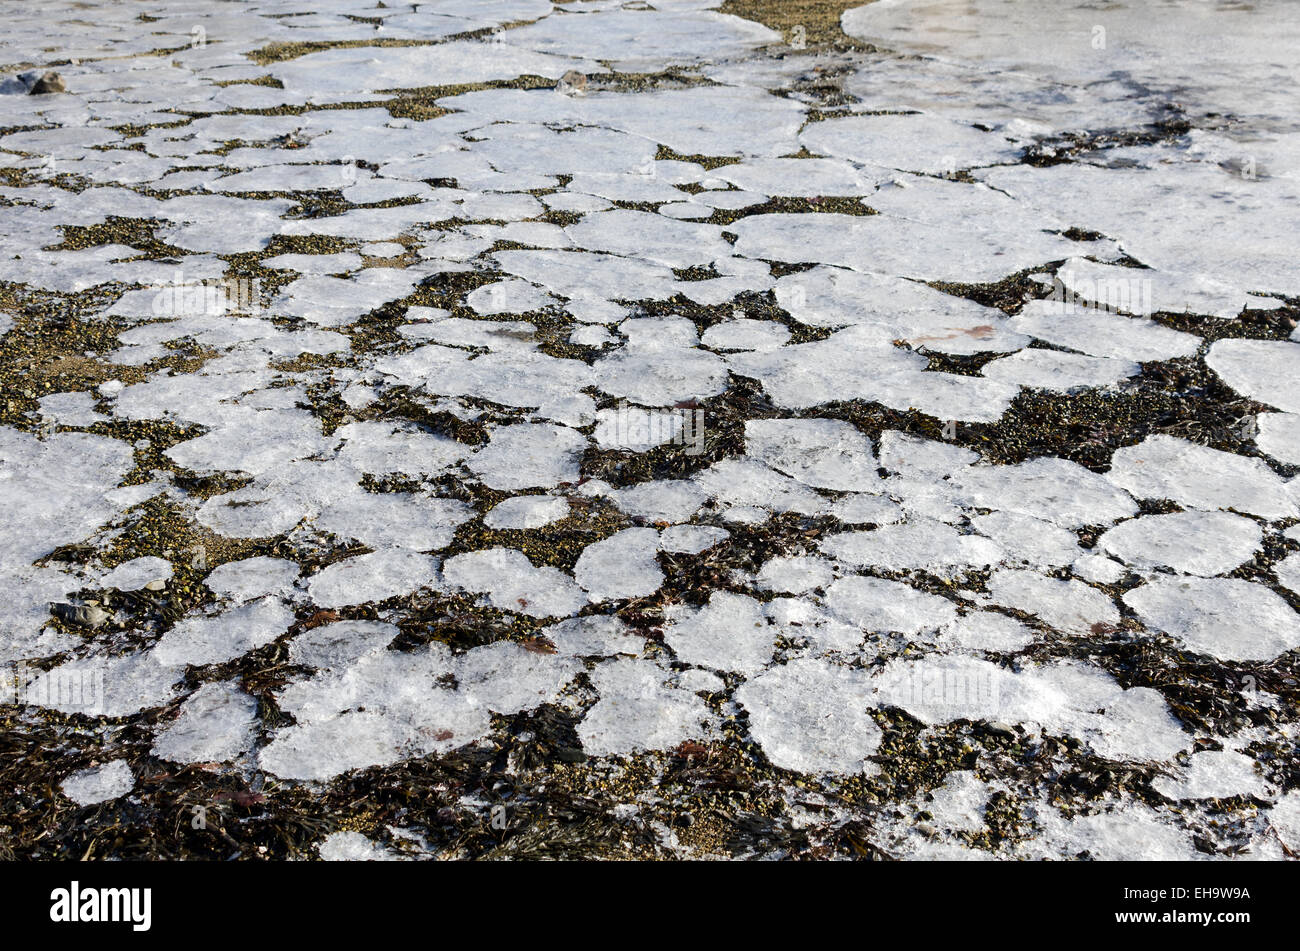 Pancake ice that formed in shallow coastal waters has been left lying on a sheltered beach by the outgoing tide. Stock Photo